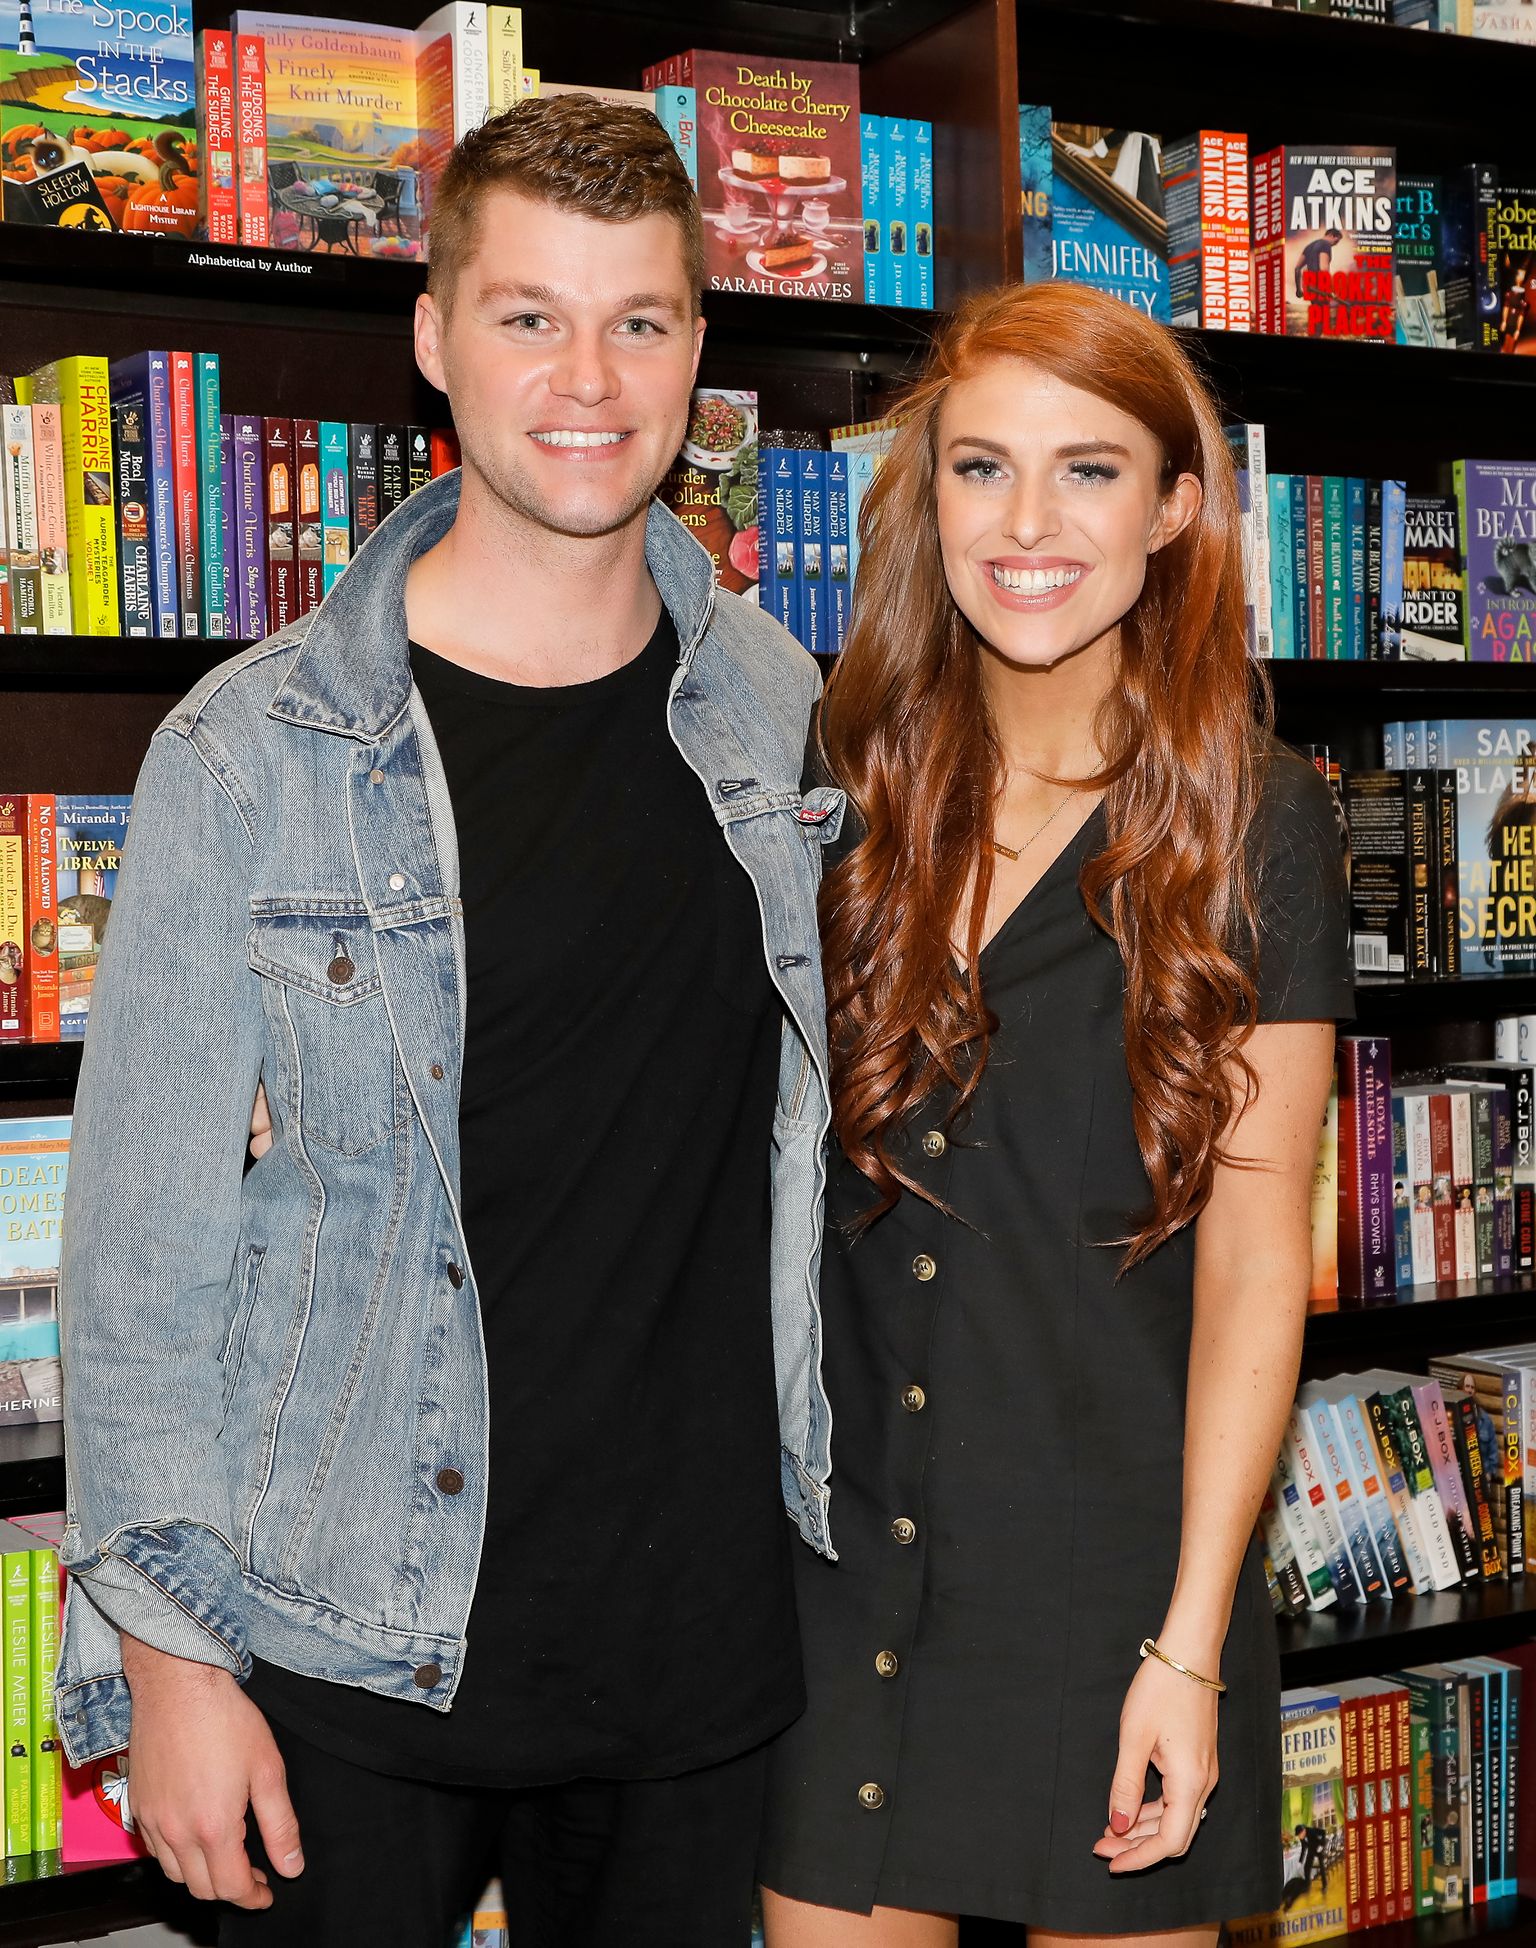 Jeremy Roloff and Audrey Roloff celebrate their new book 'A Love Letter Life' at Barnes & Noble at The Grove on April 10, 2019 in Los Angeles, California.| Photo: getty Images